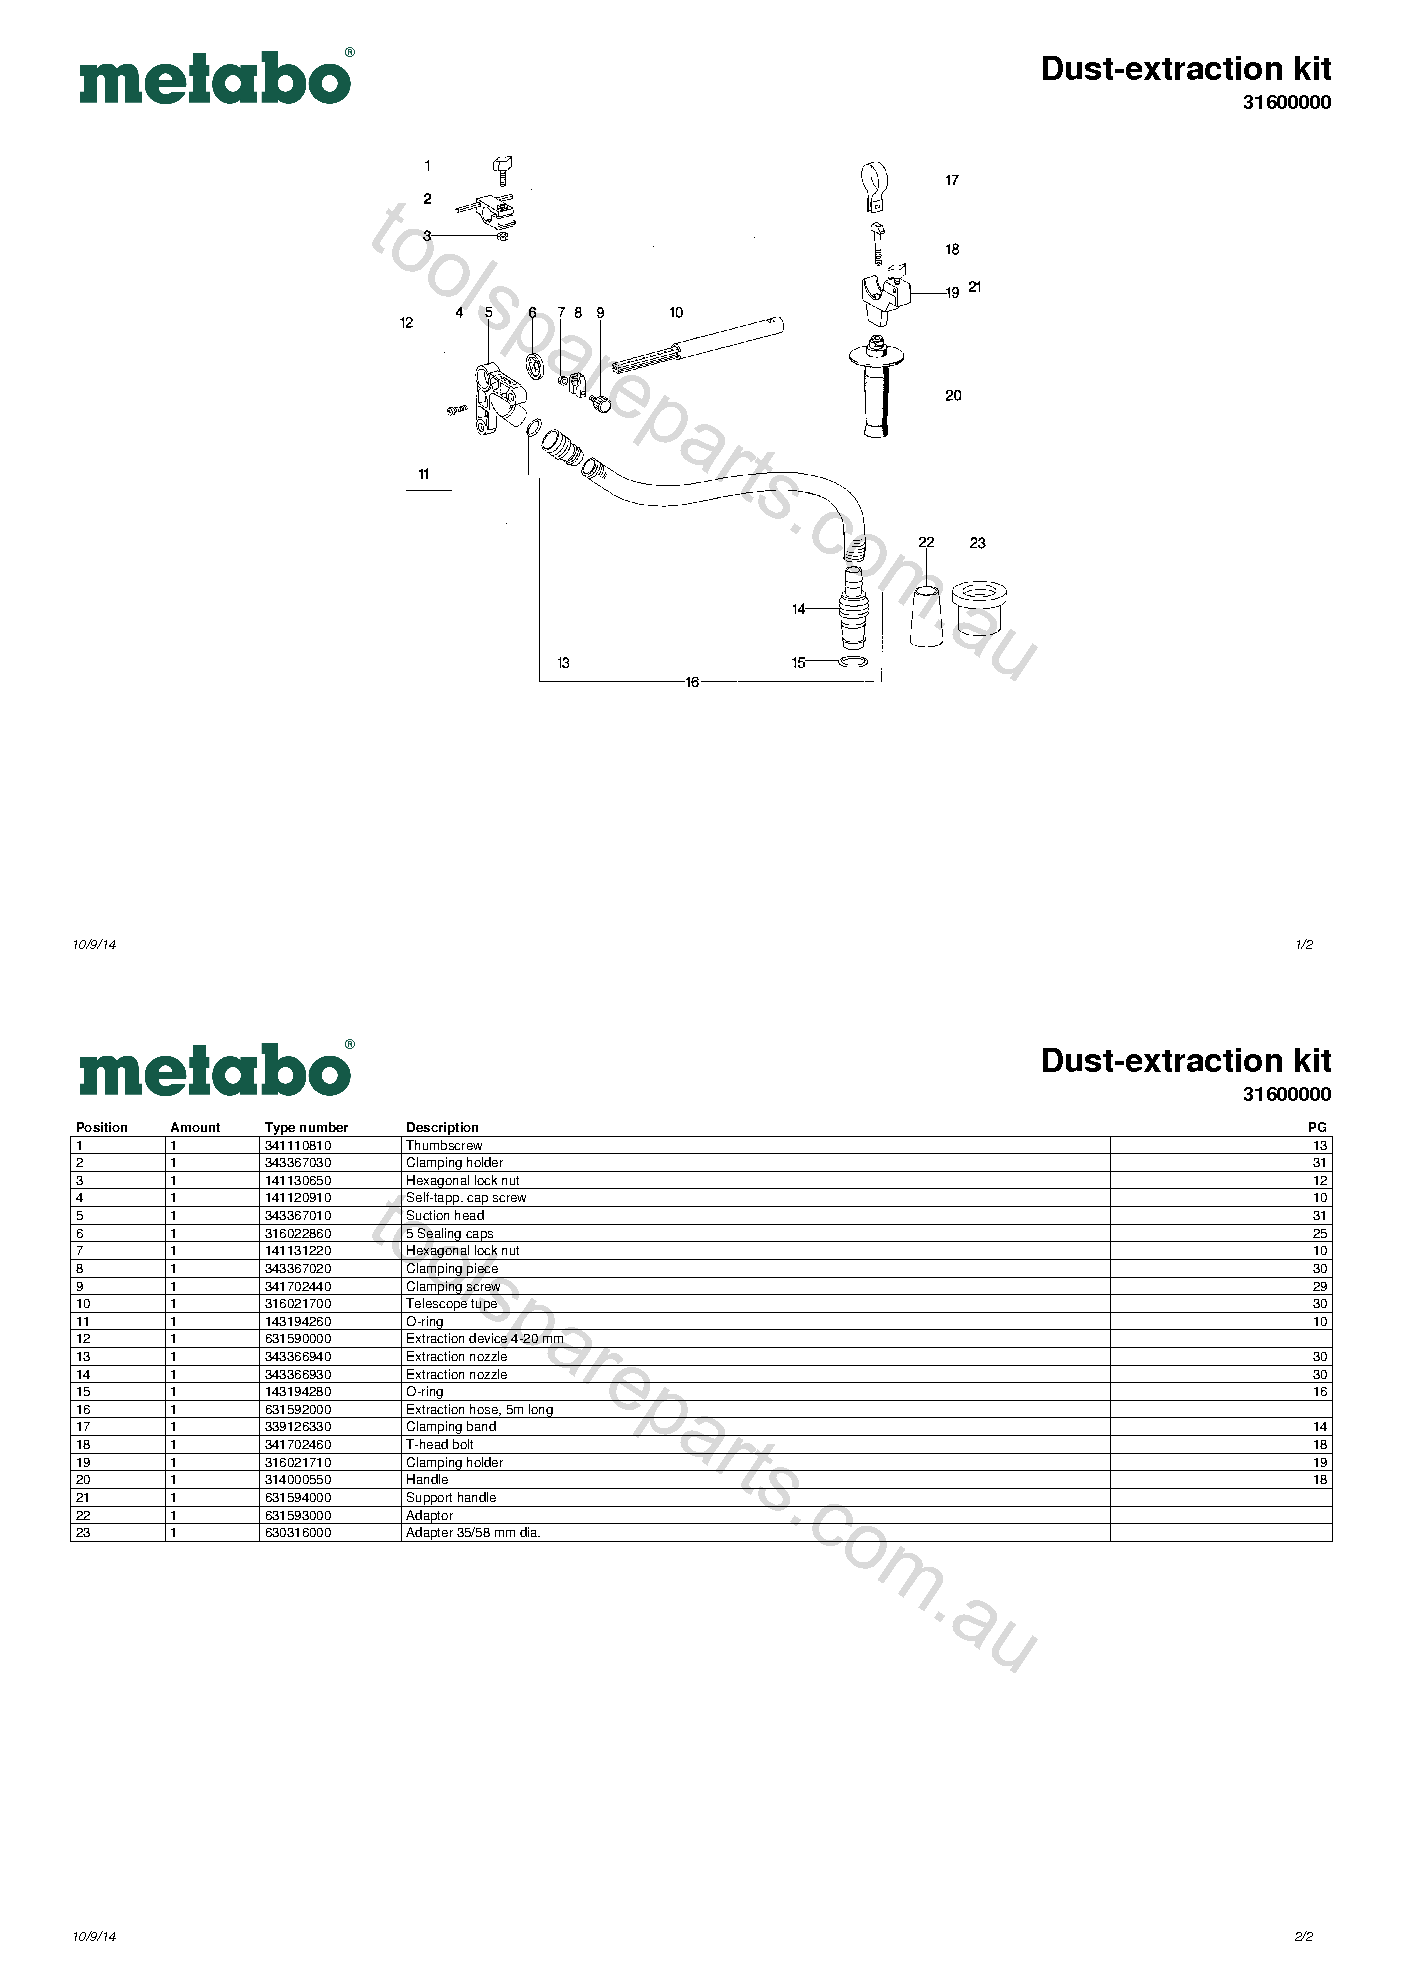 Metabo Dust-extraction kit 31600000  Diagram 1